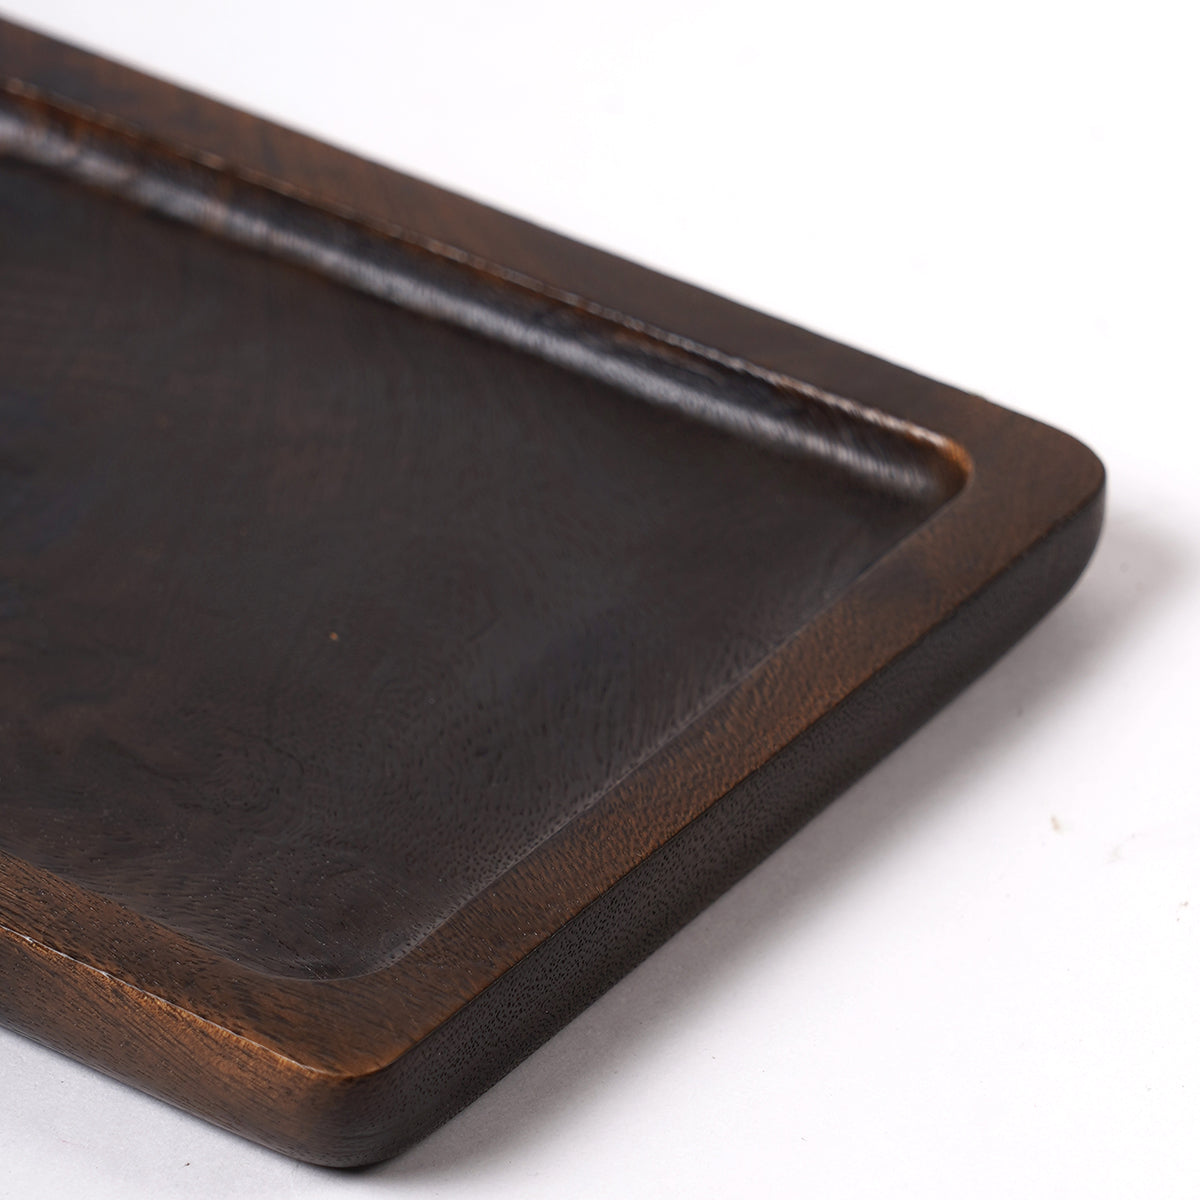 Wooden tray, dark brown, round edged rustic serving tray, farmhouse decor, 6X10 inches